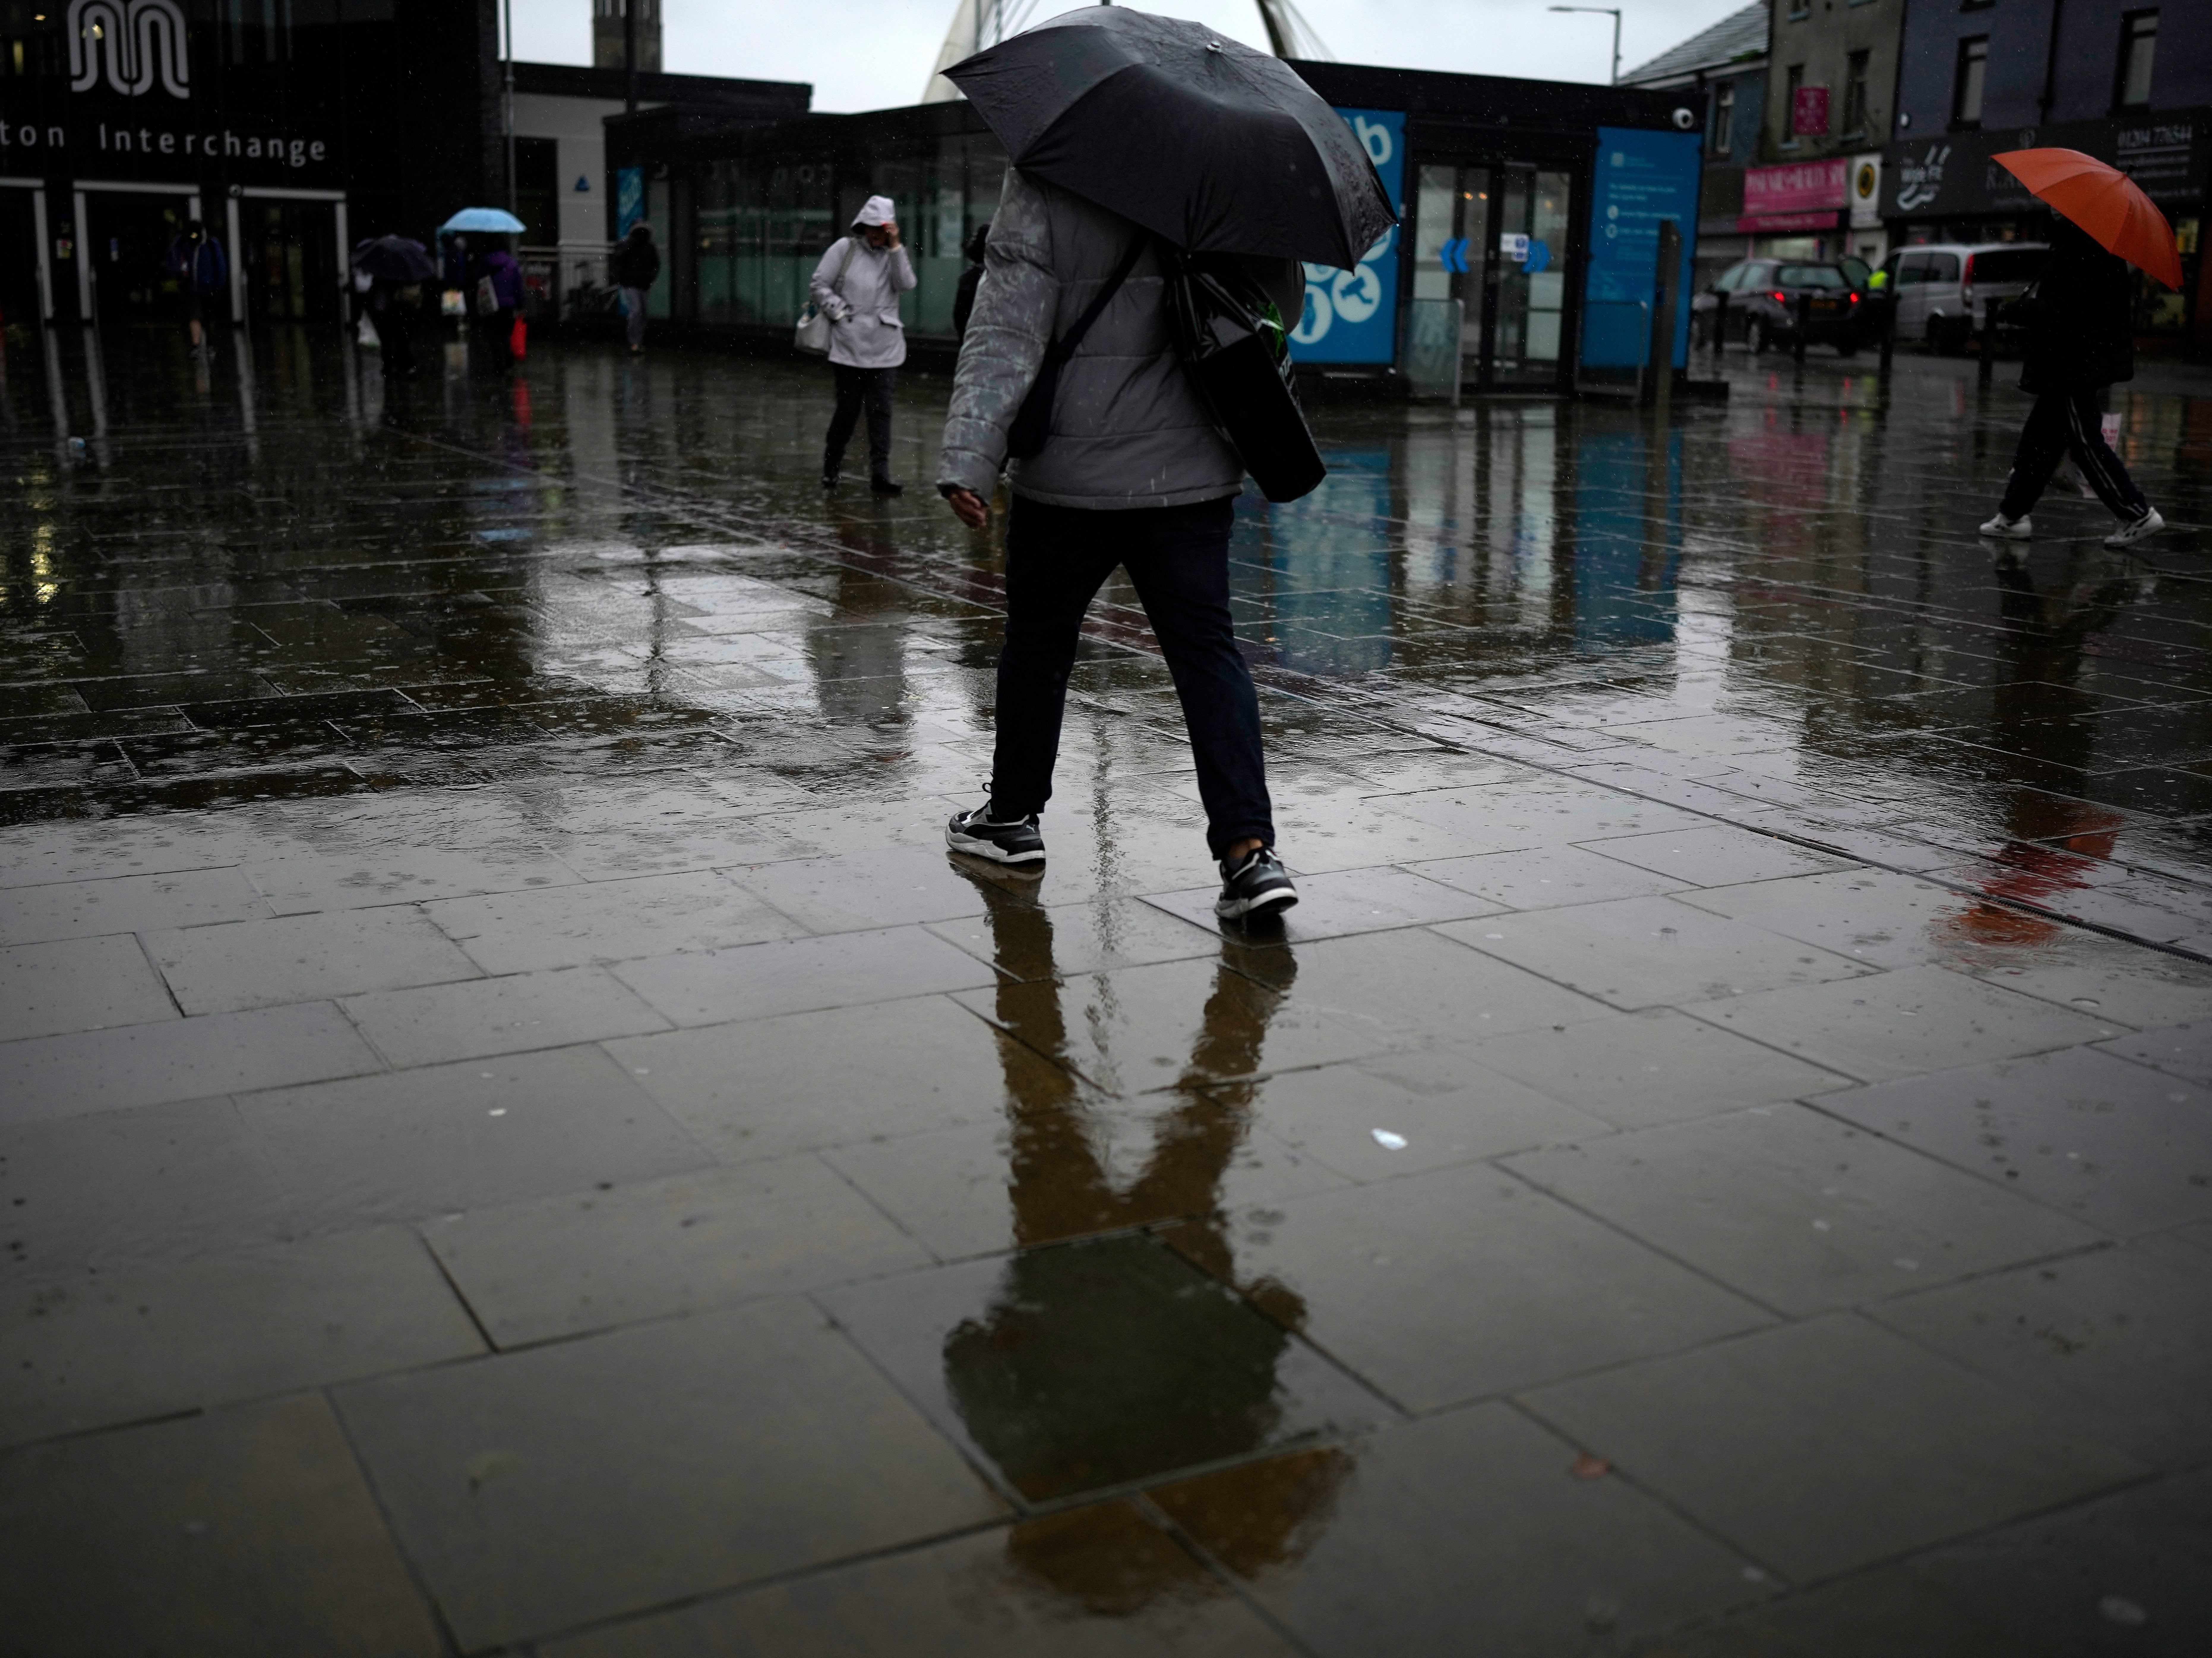 The Met Office has issued a weather warning for rain and wind